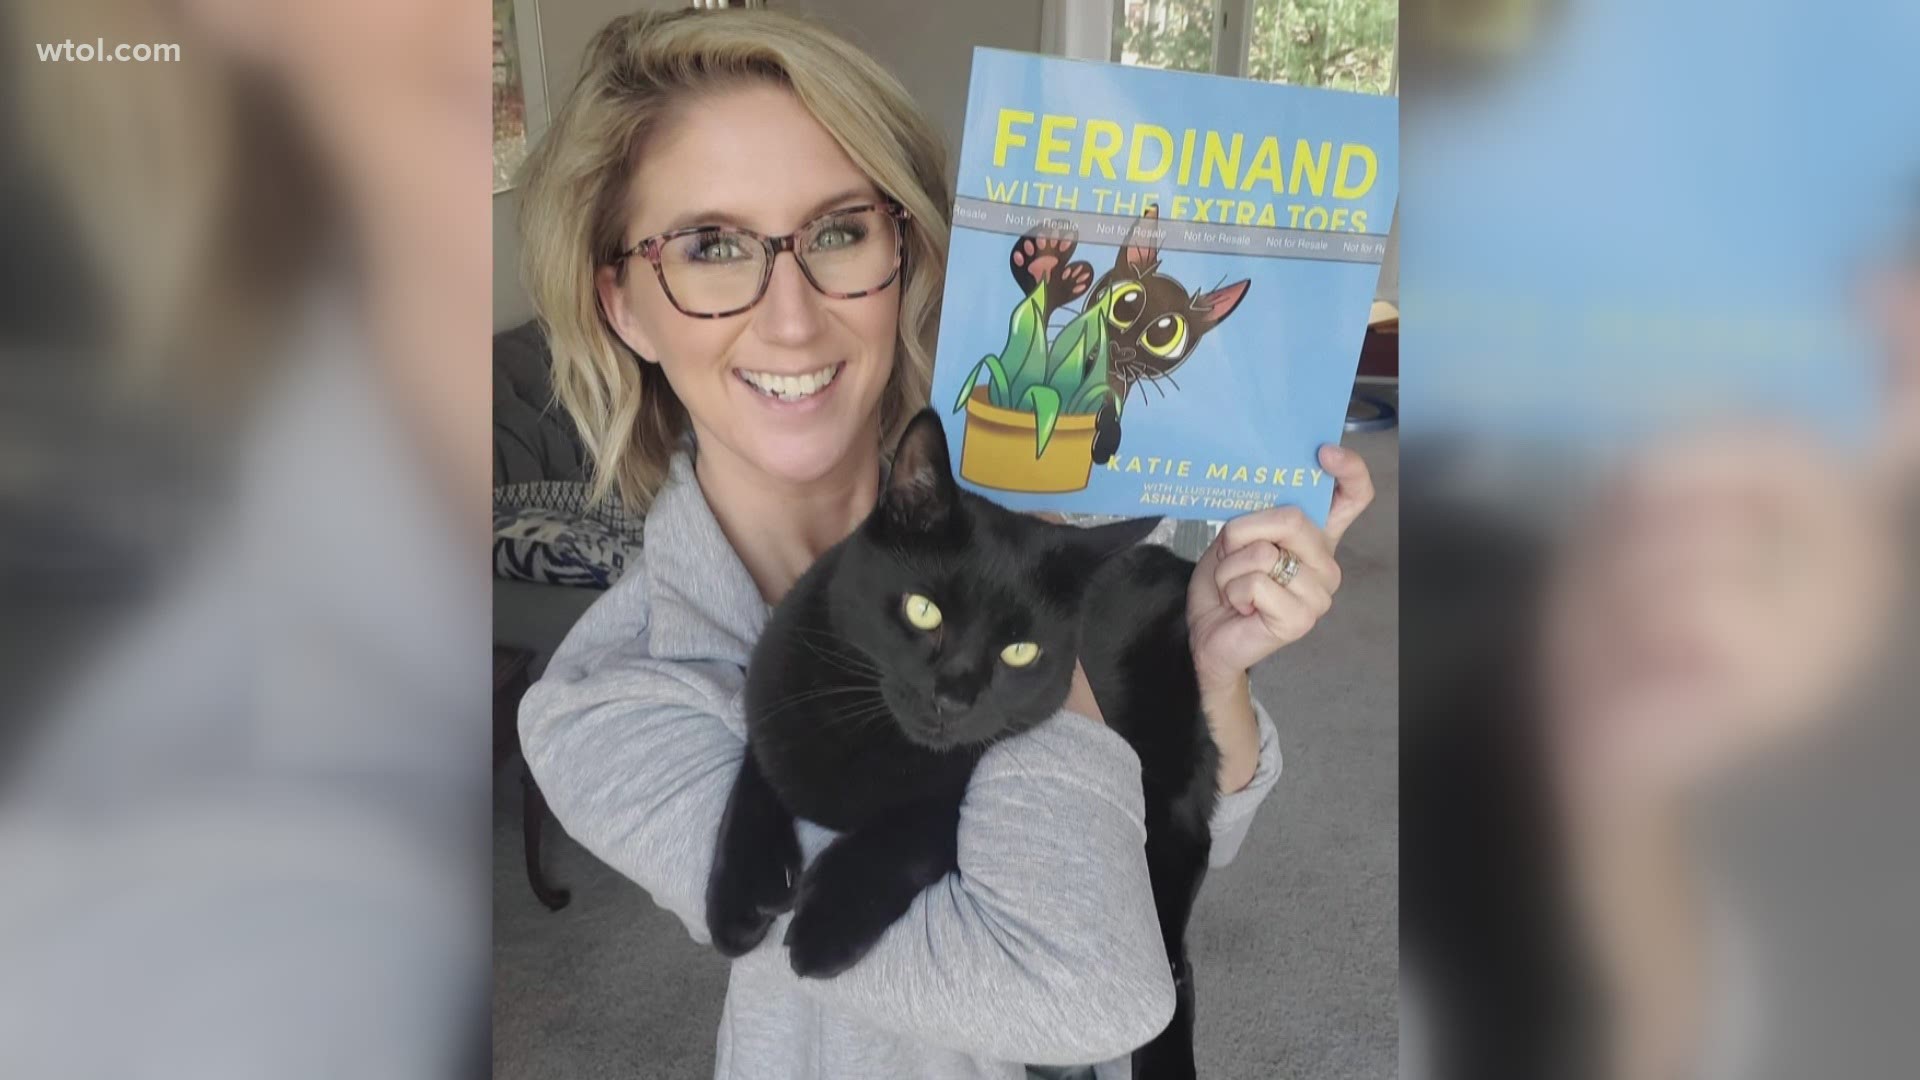 The book titled 'Ferdinand with the Extra Toes,' has already received a lot of positive feedback.